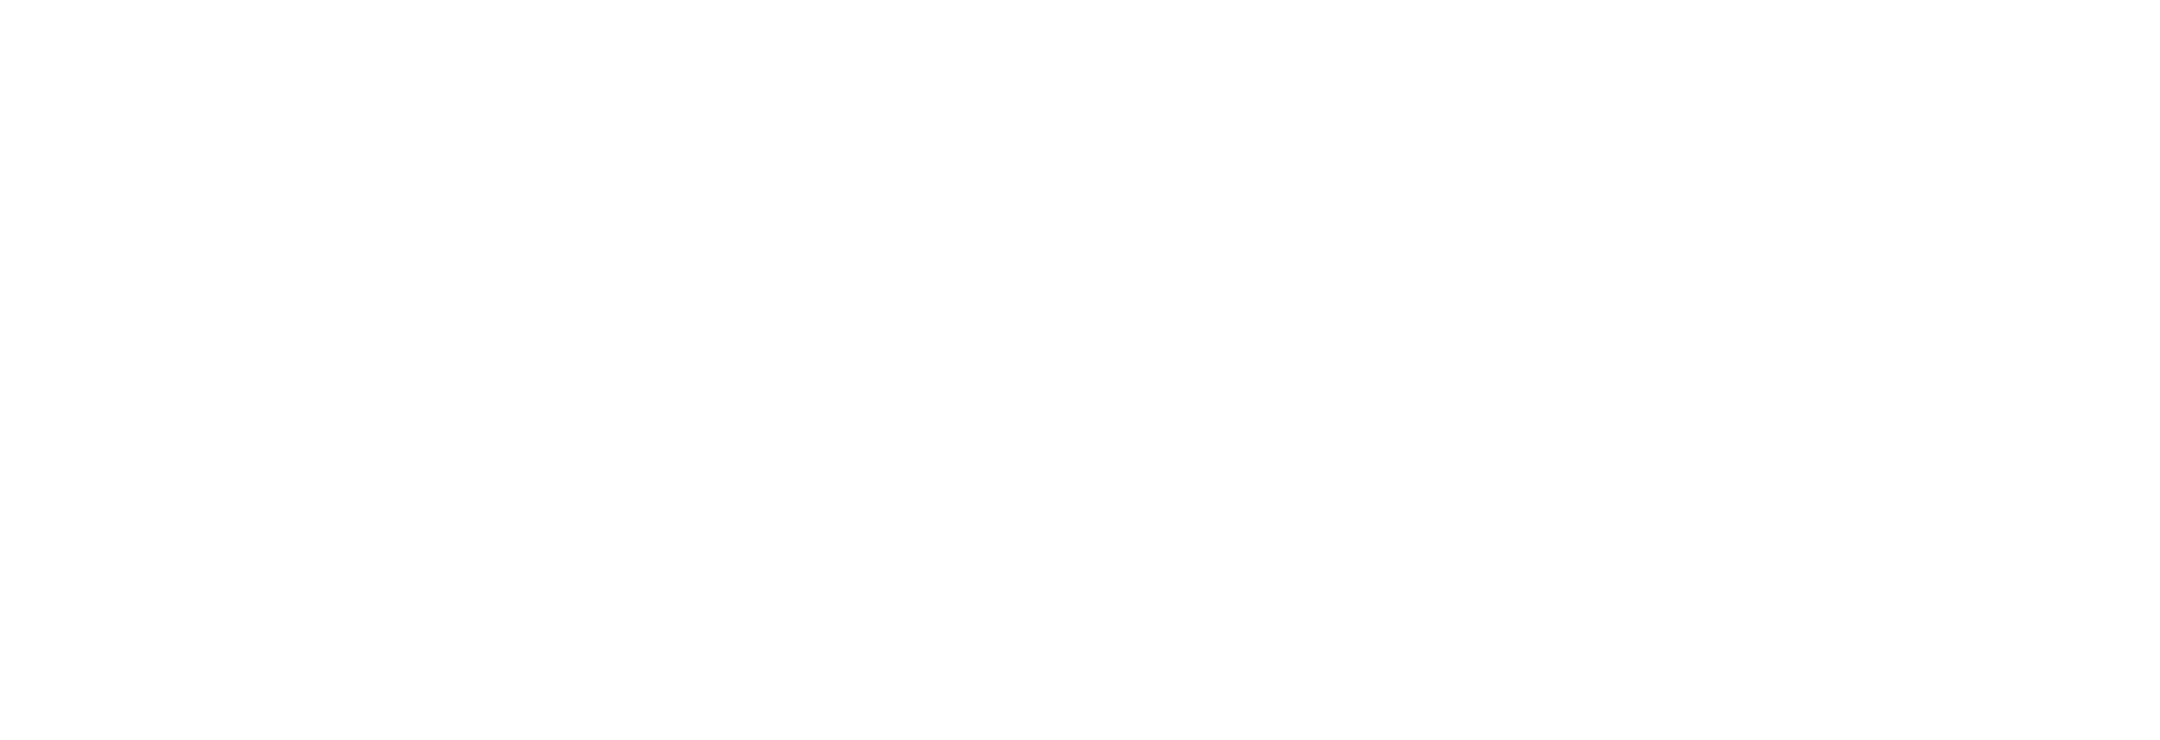 Colocation Variety Table